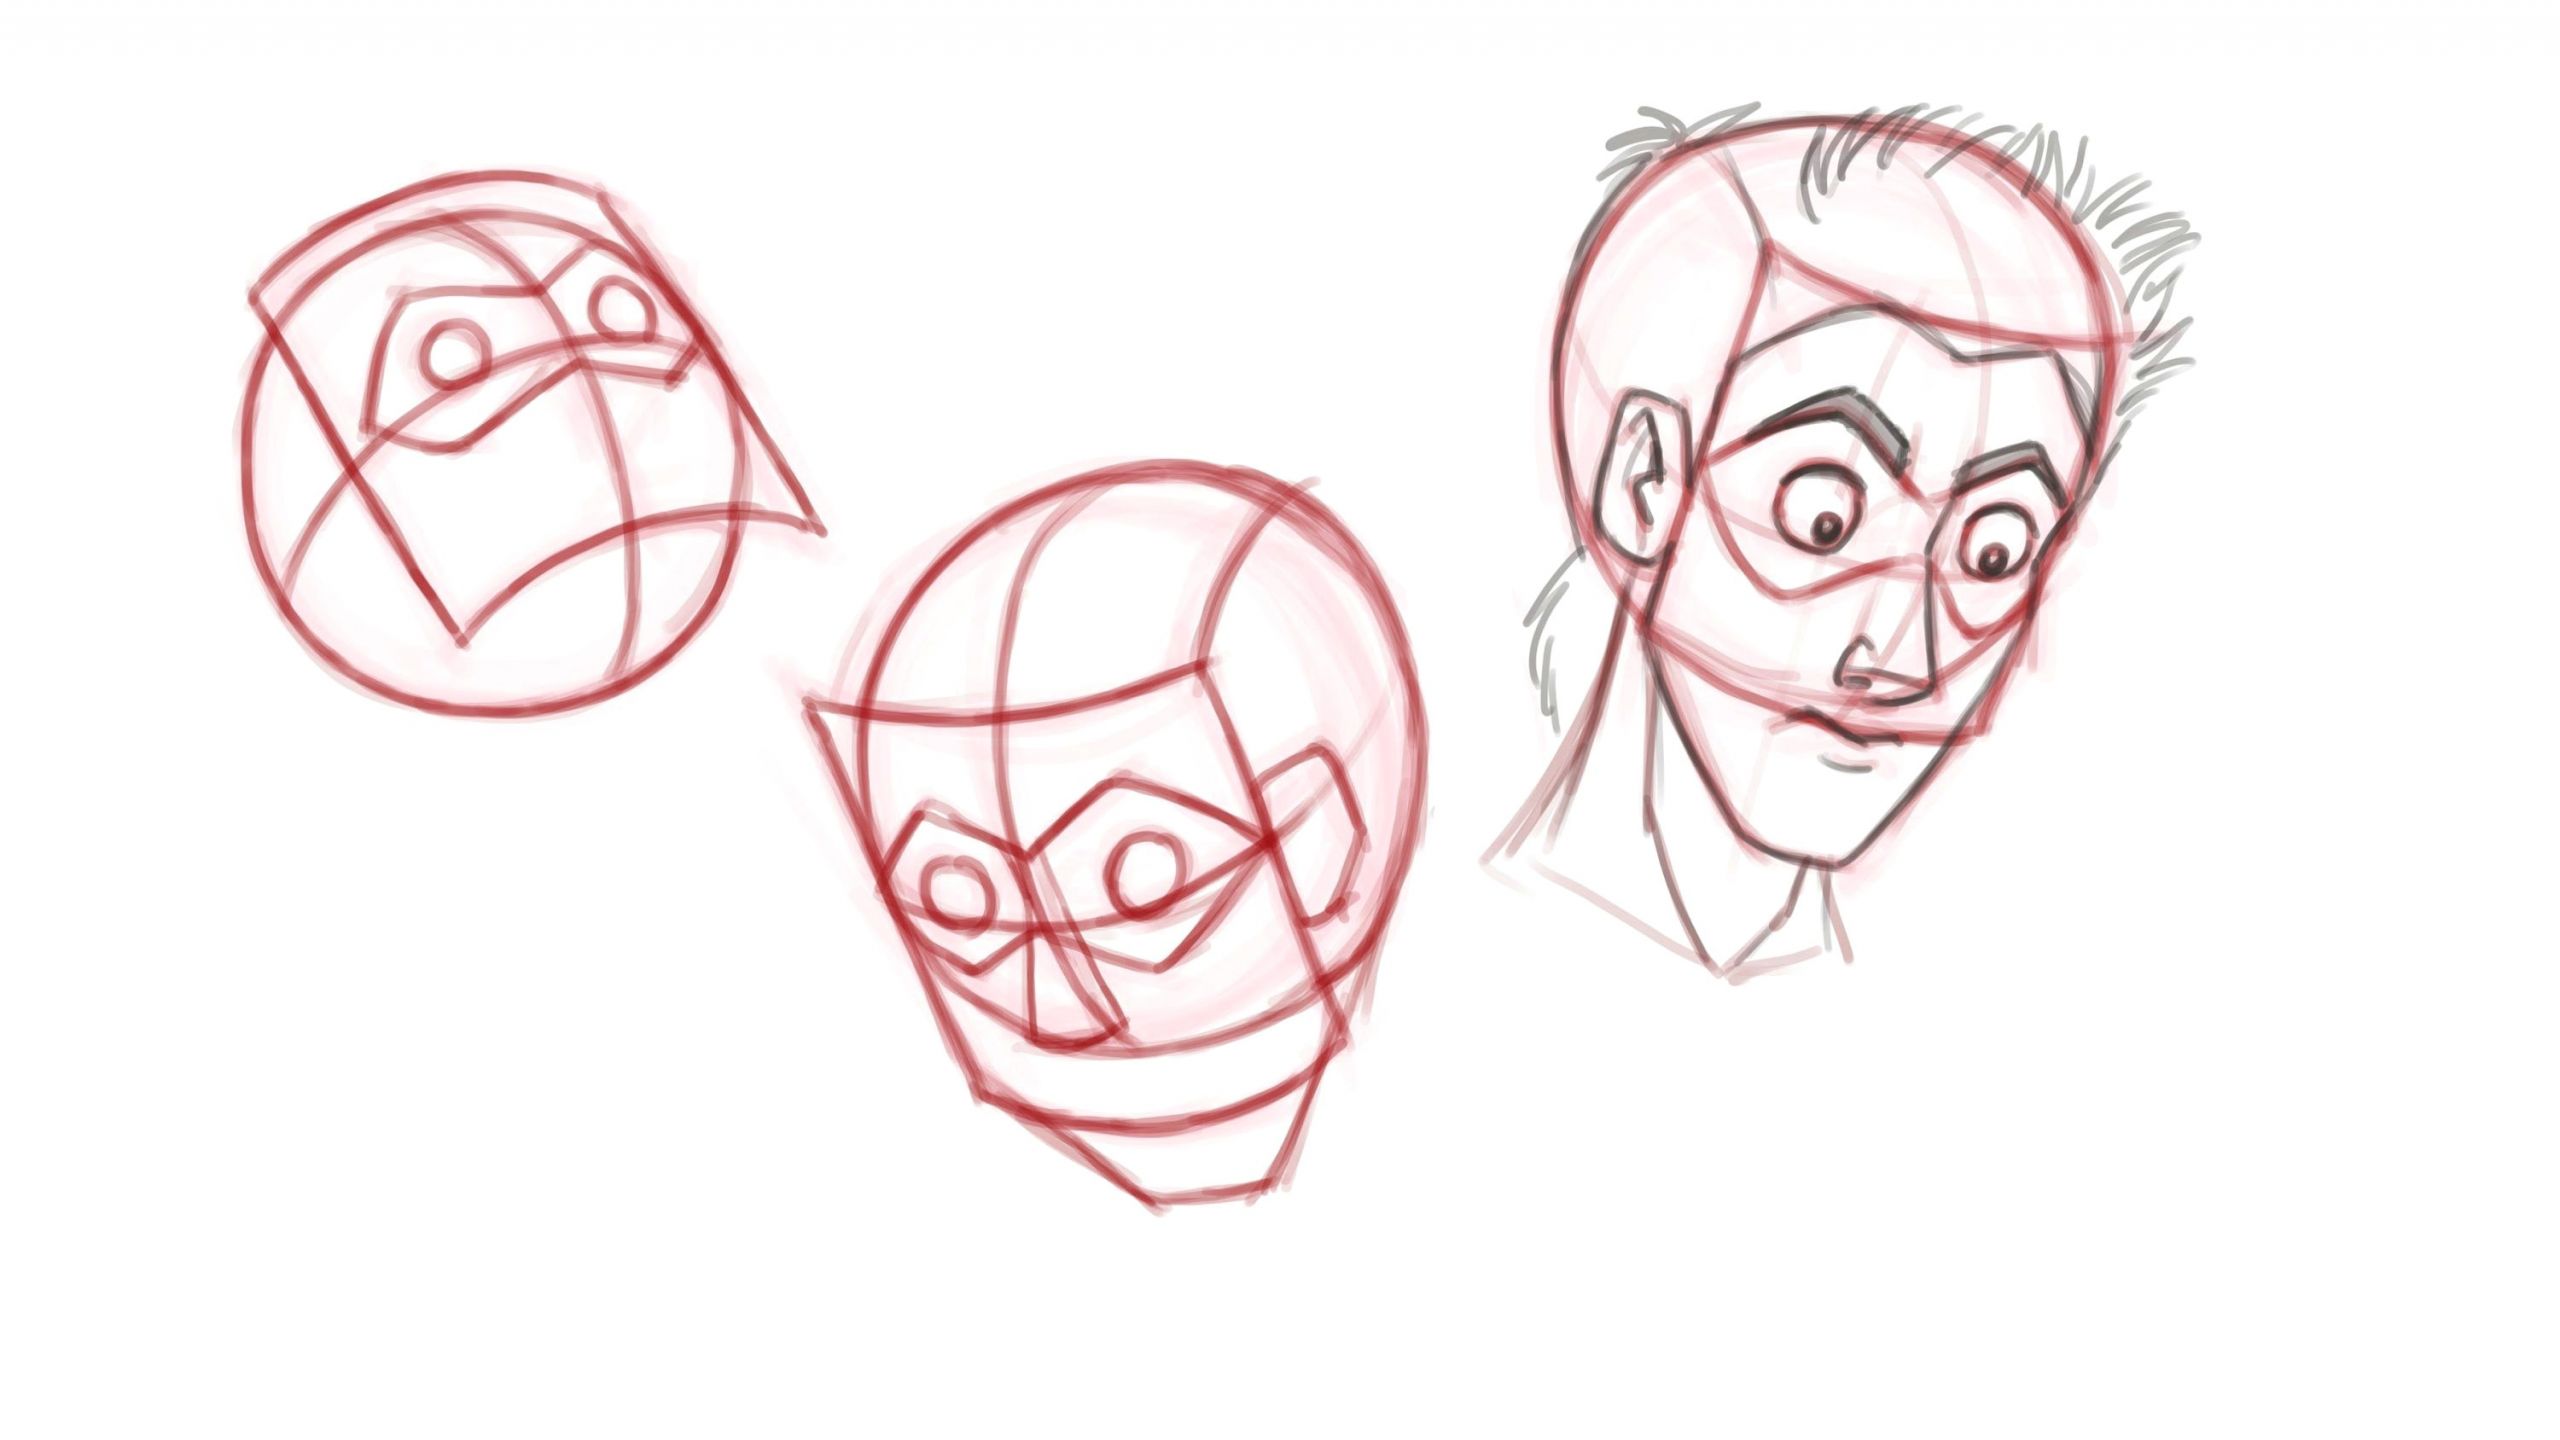 Animations to Draw How to Draw Animate Heads Faces From Different Angles